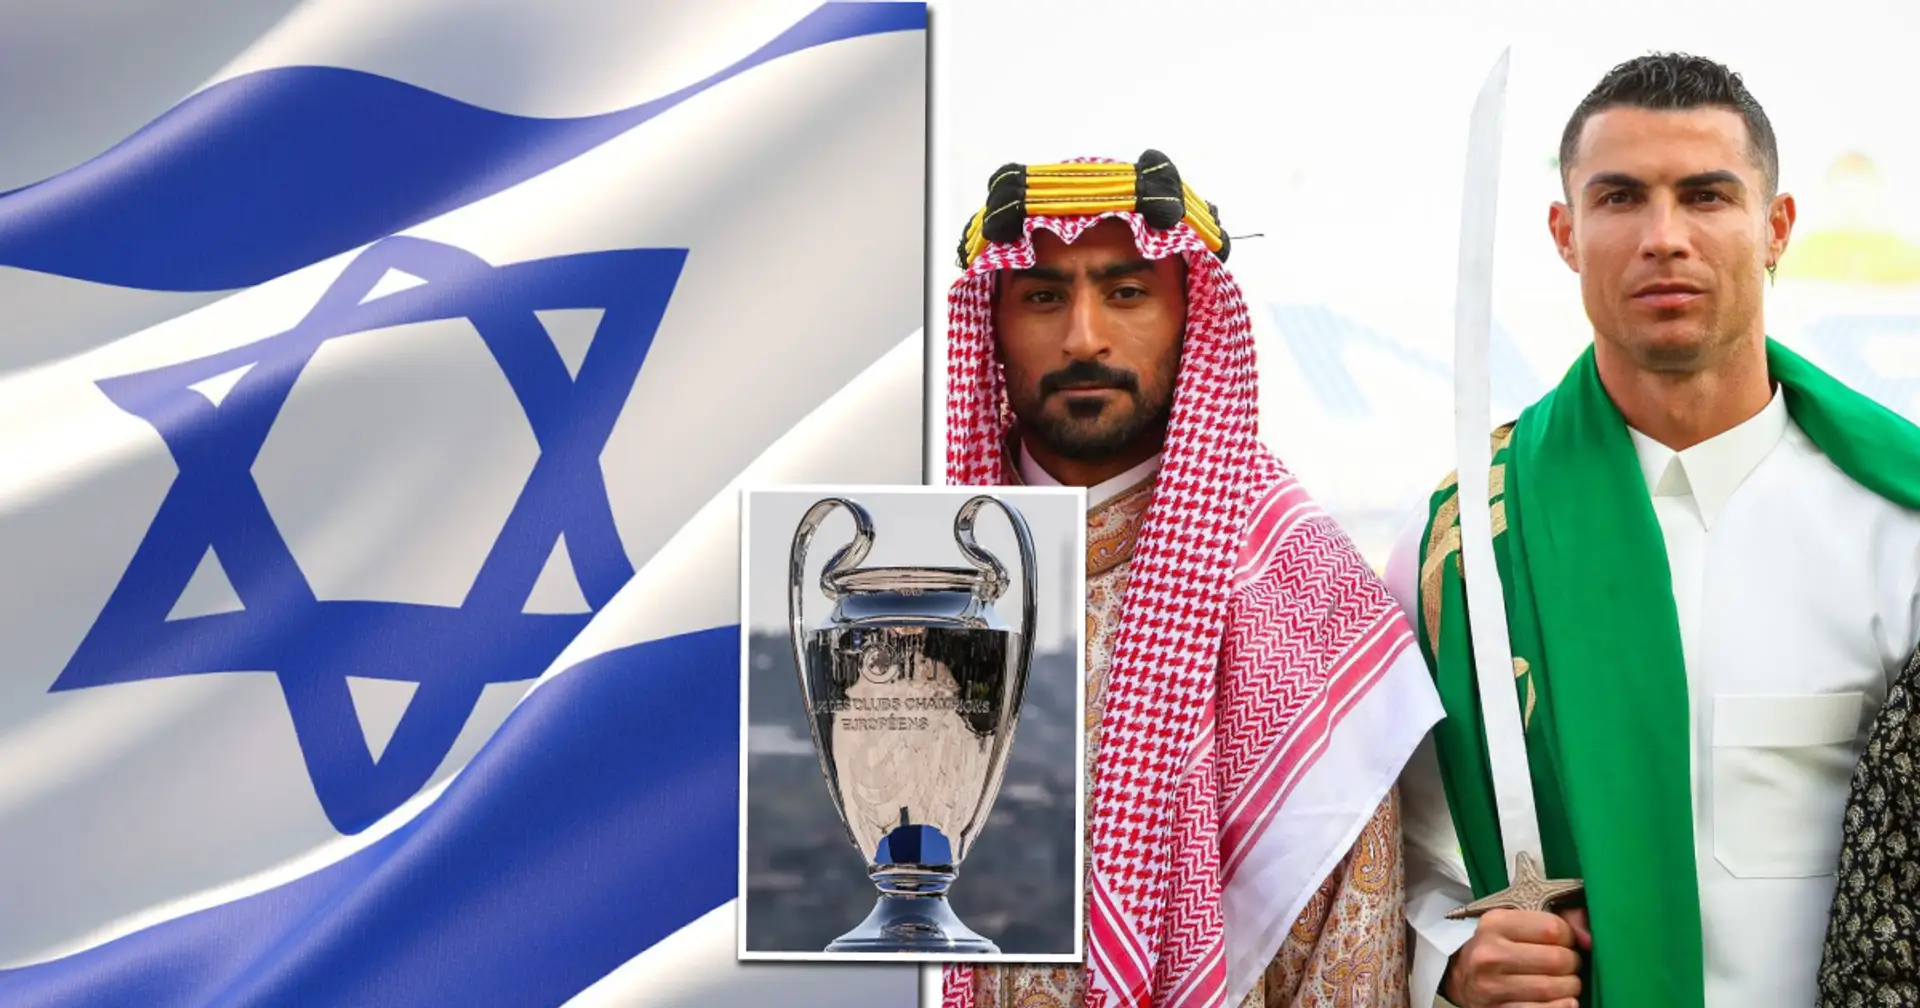 'What about Israel?': Global fans ask UEFA president same question amid his latest Saudi quote  